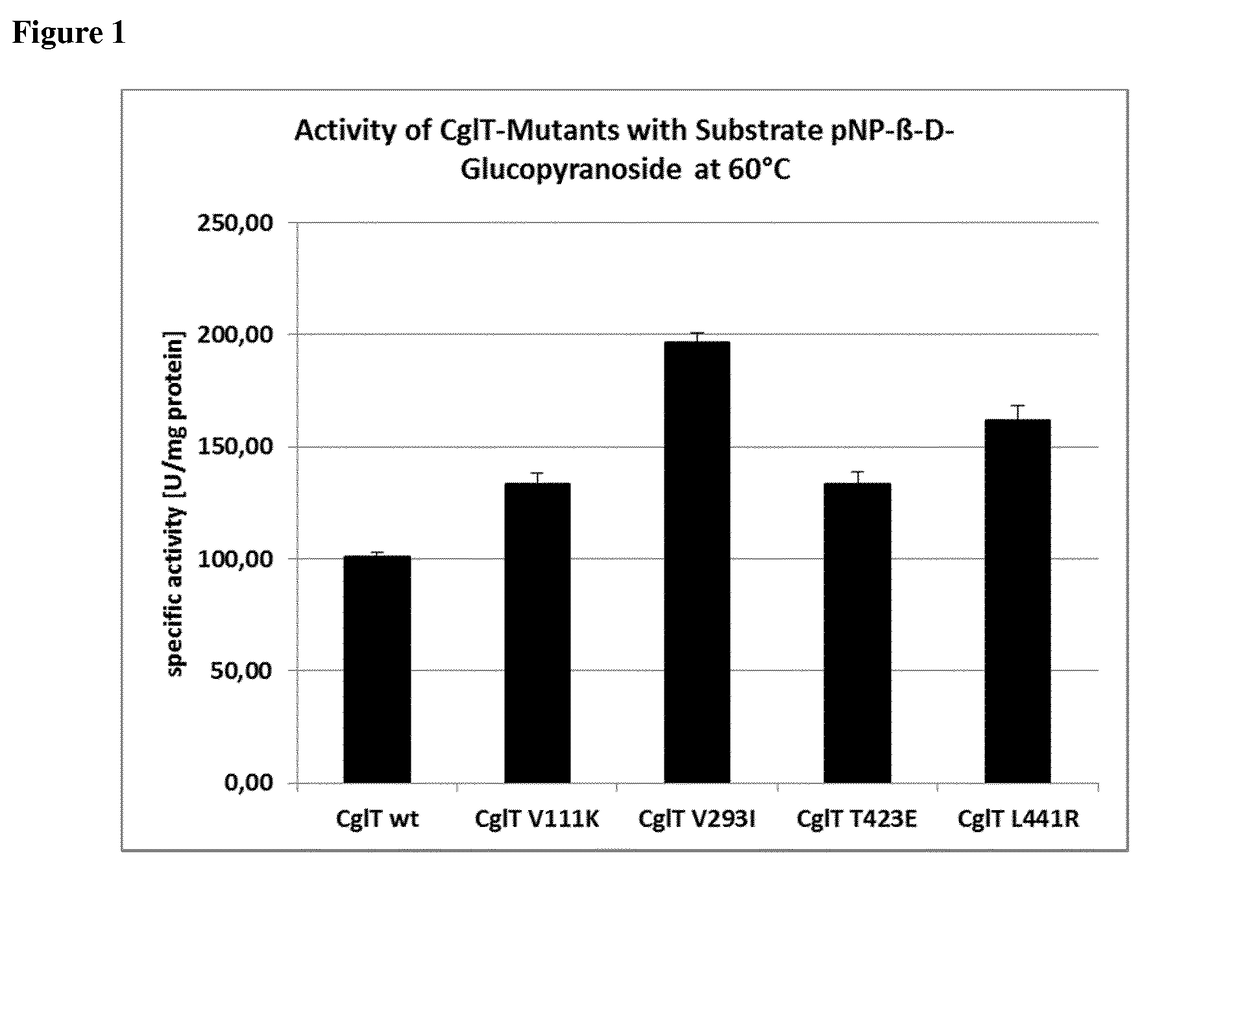 Mutant beta-glucosidase variants with increased thermostability